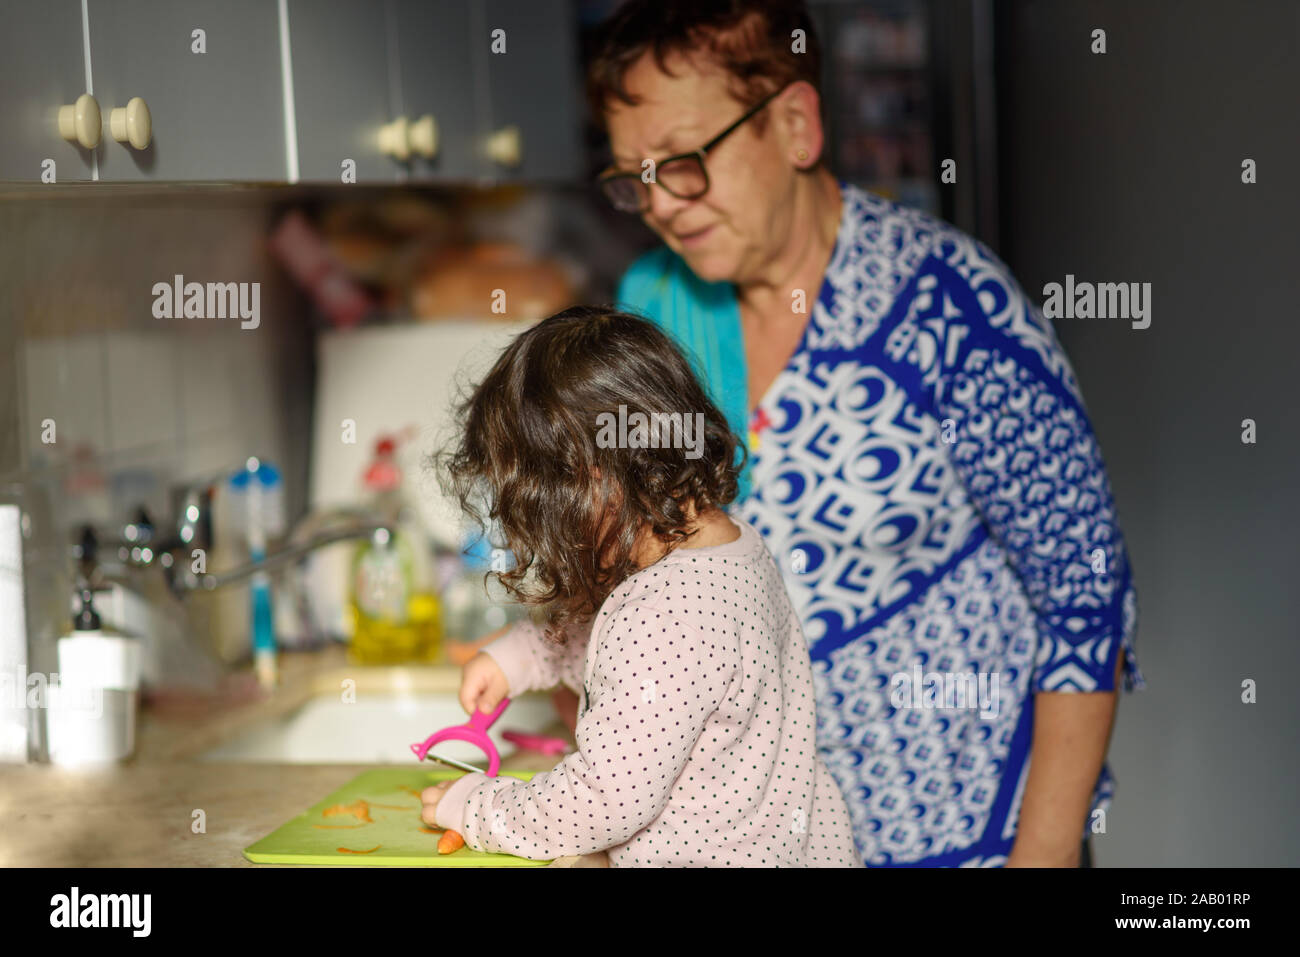 https://c8.alamy.com/comp/2AB01RP/little-cute-baby-toddler-girl-with-grandmother-in-the-kitchen-peeling-carrots-with-carrot-peeler-on-chopping-board-child-help-at-home-cooking-with-kids-healthy-food-family-love-2AB01RP.jpg